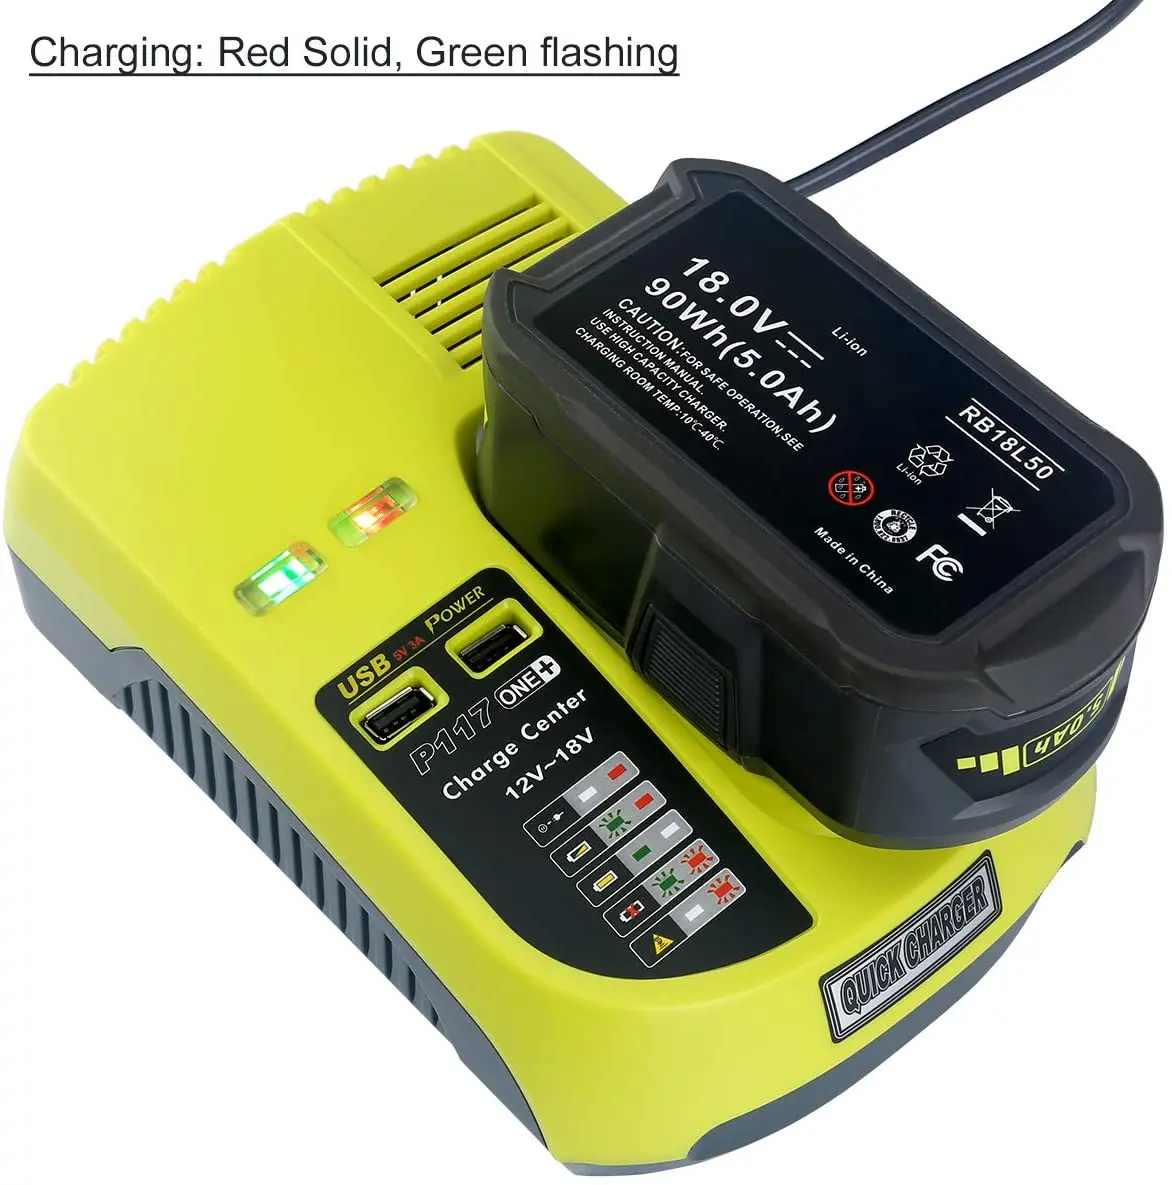 

P117 Charger For Ryobi ONE+Plus P108 Dual Chemistry Battery 12V-18V EU/US/AU Plug For Ryobi 12V-18V Ni-CD Ni-MH Li-ion Battery